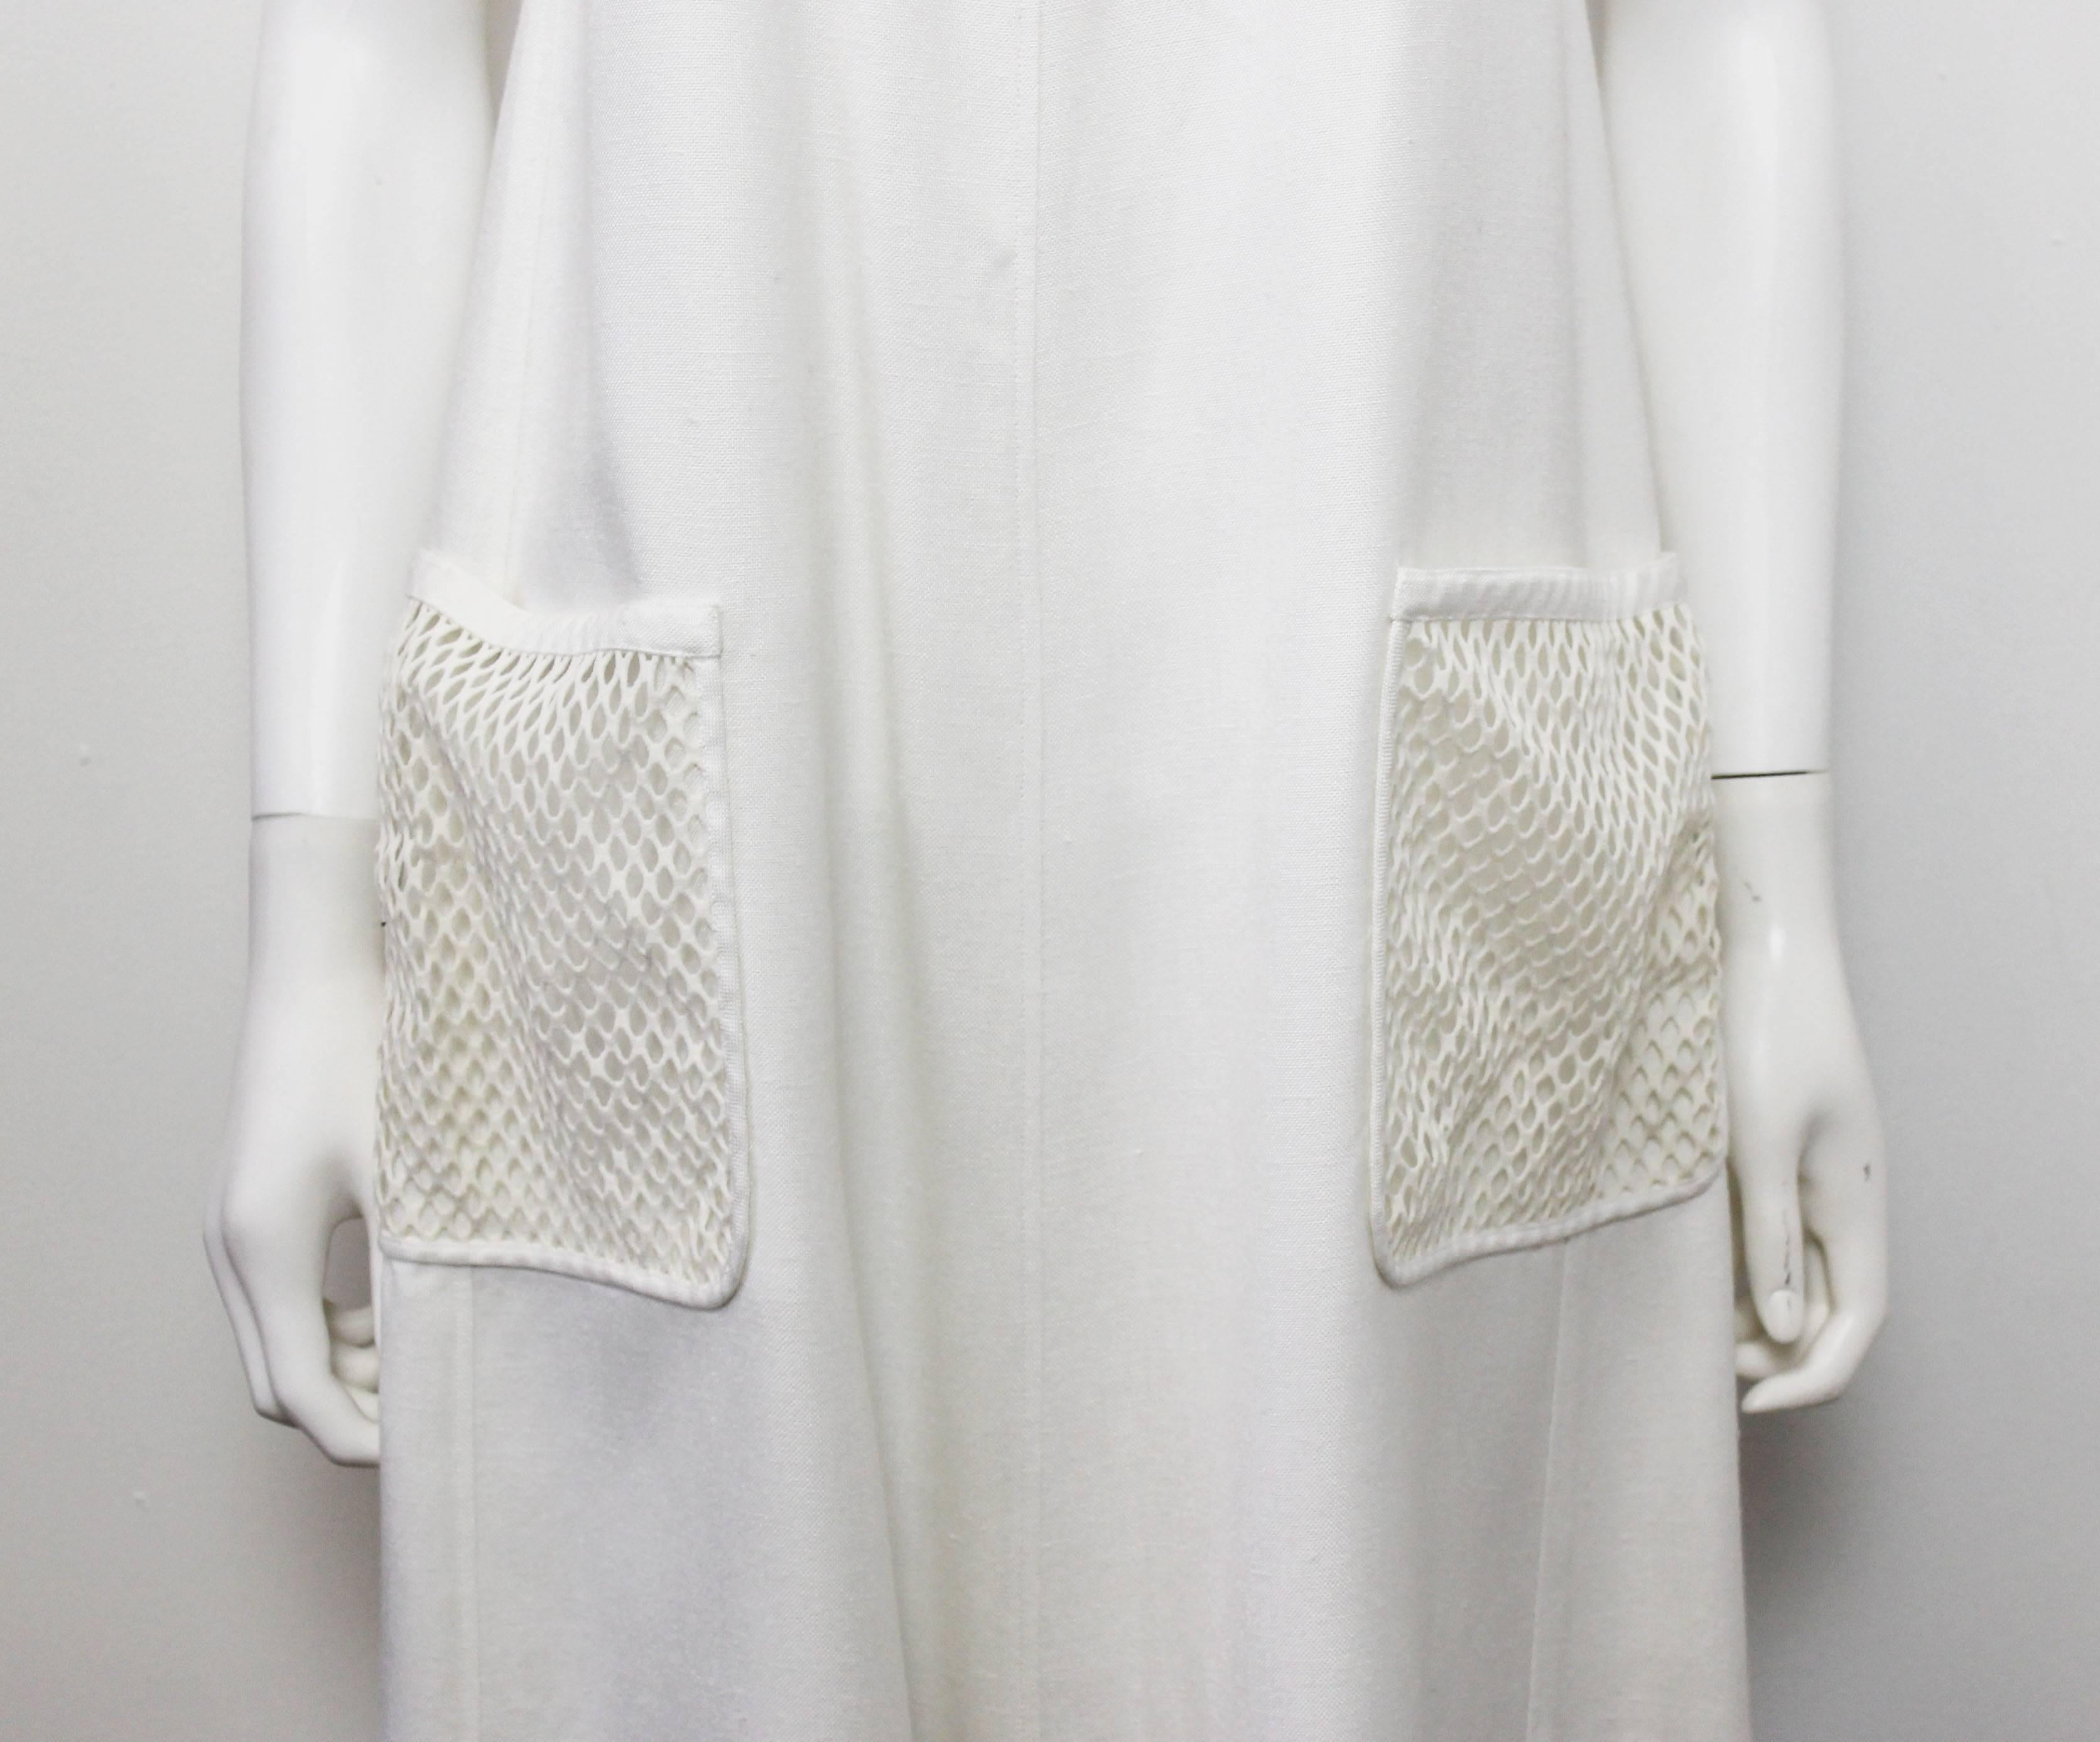 A classic and timeless piece by Courreges. The dress features an a-line shape with white net pockets and back panel.